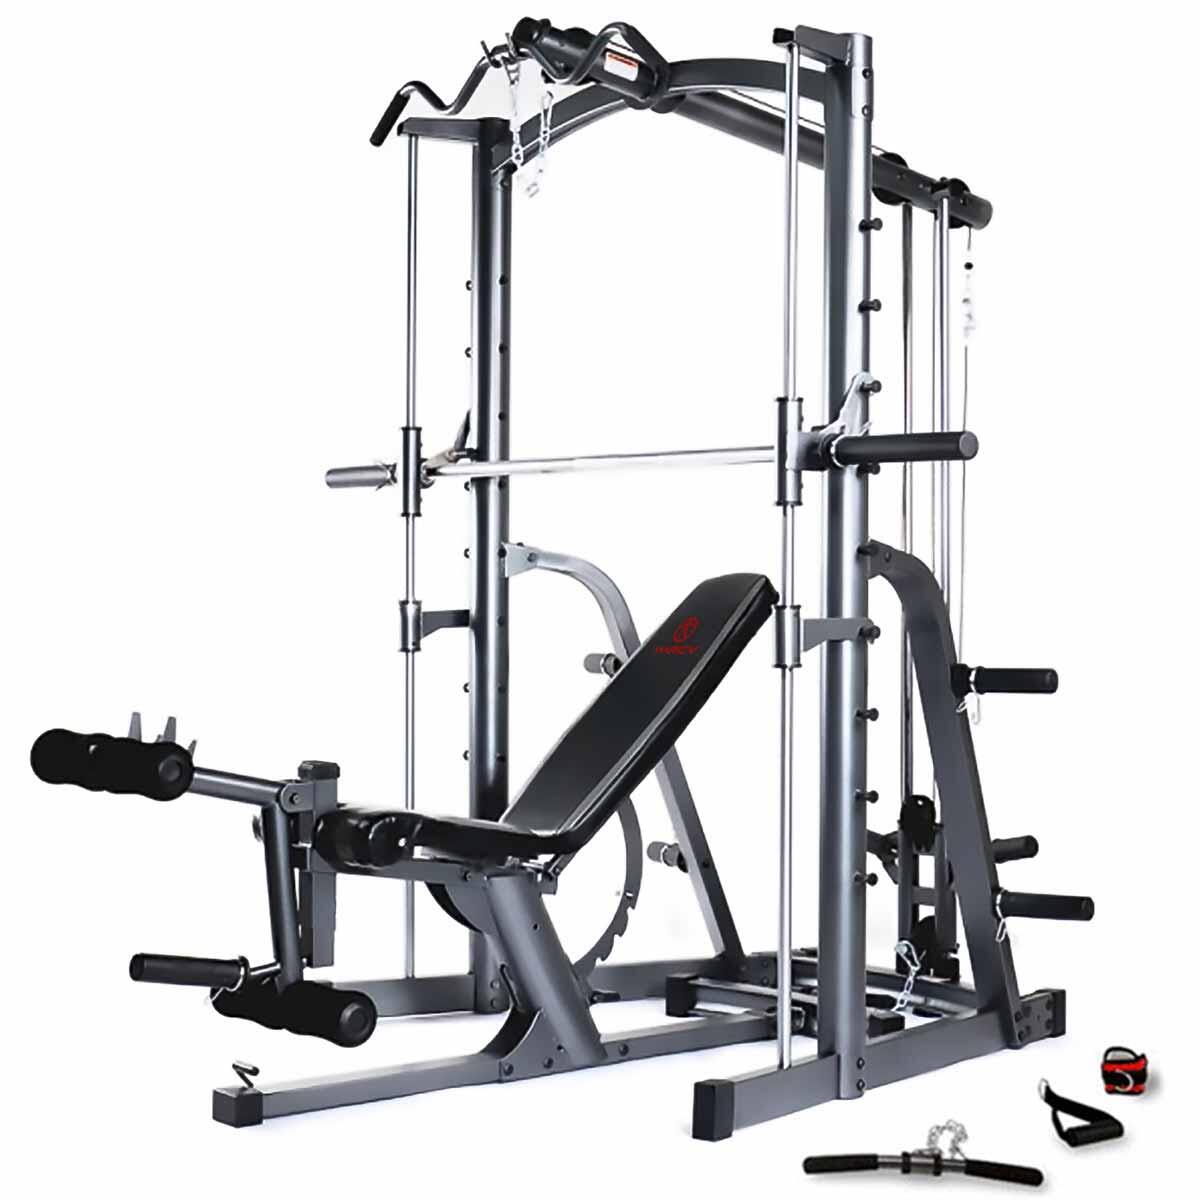 MARCY MARCY PLATINUM MWB1282 SMITH MACHINE HOME GYM WITH WEIGHT BENCH